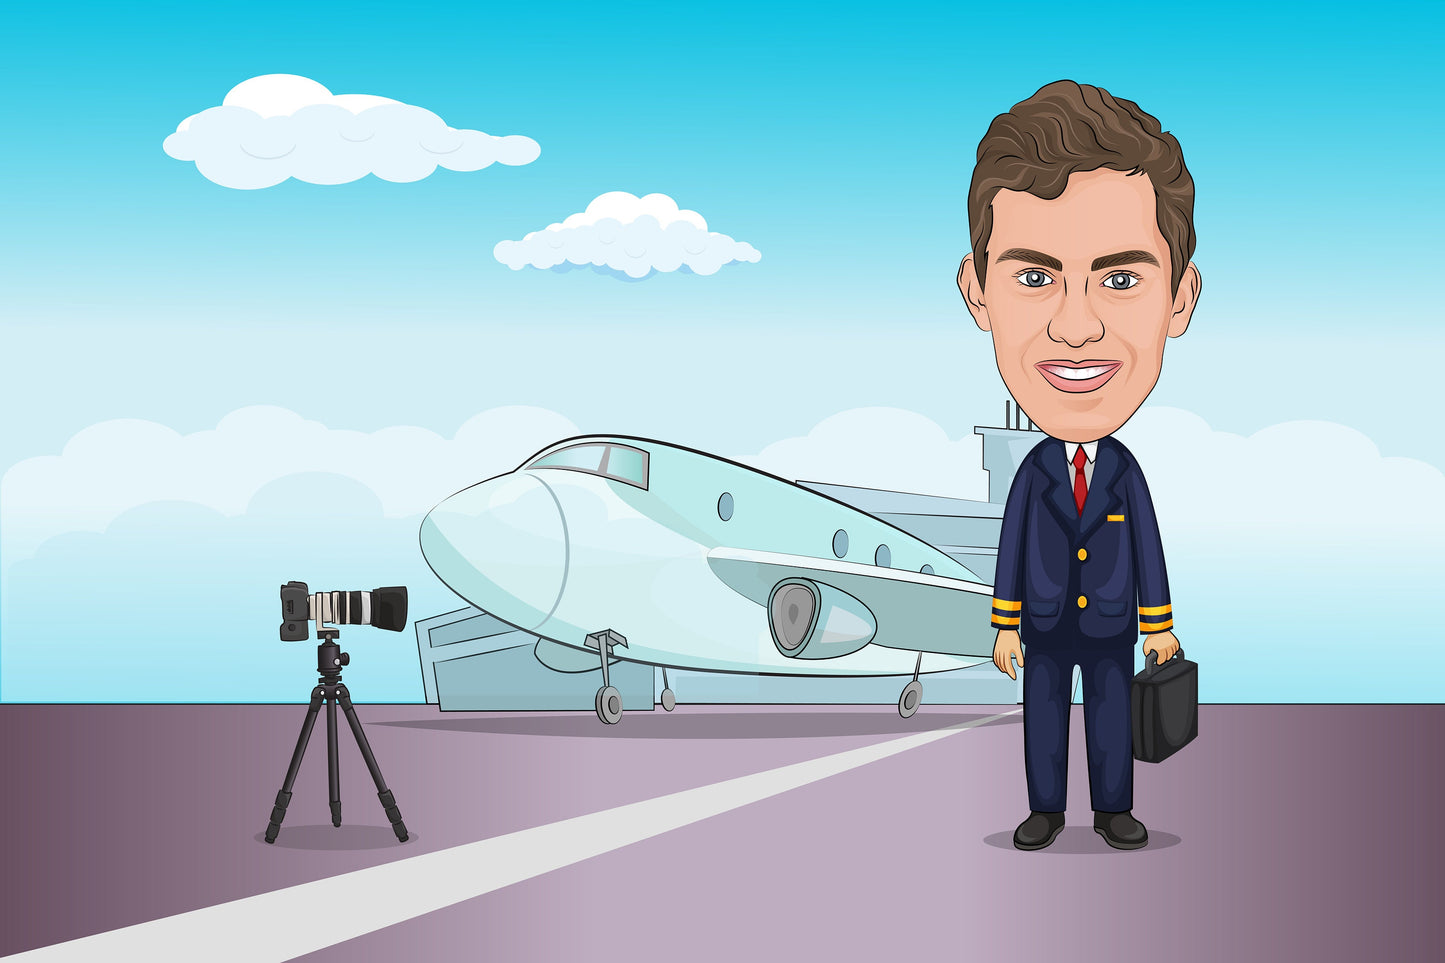 Pilot Gift - Custom Caricature Portrait From Your Photo